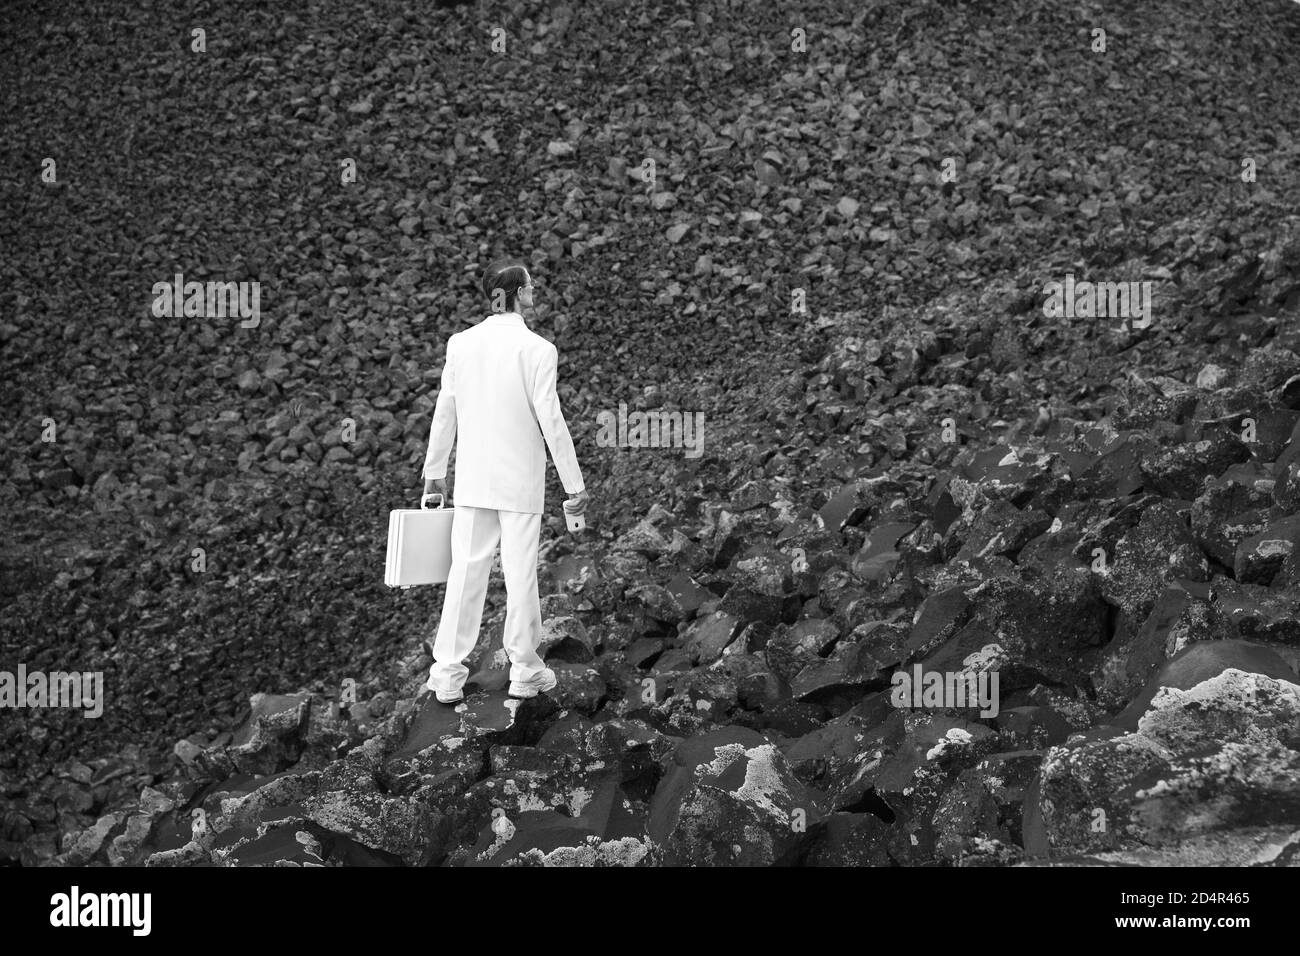 Businessman dressed in all white standing against an ominous, dark background of boulders. Stock Photo